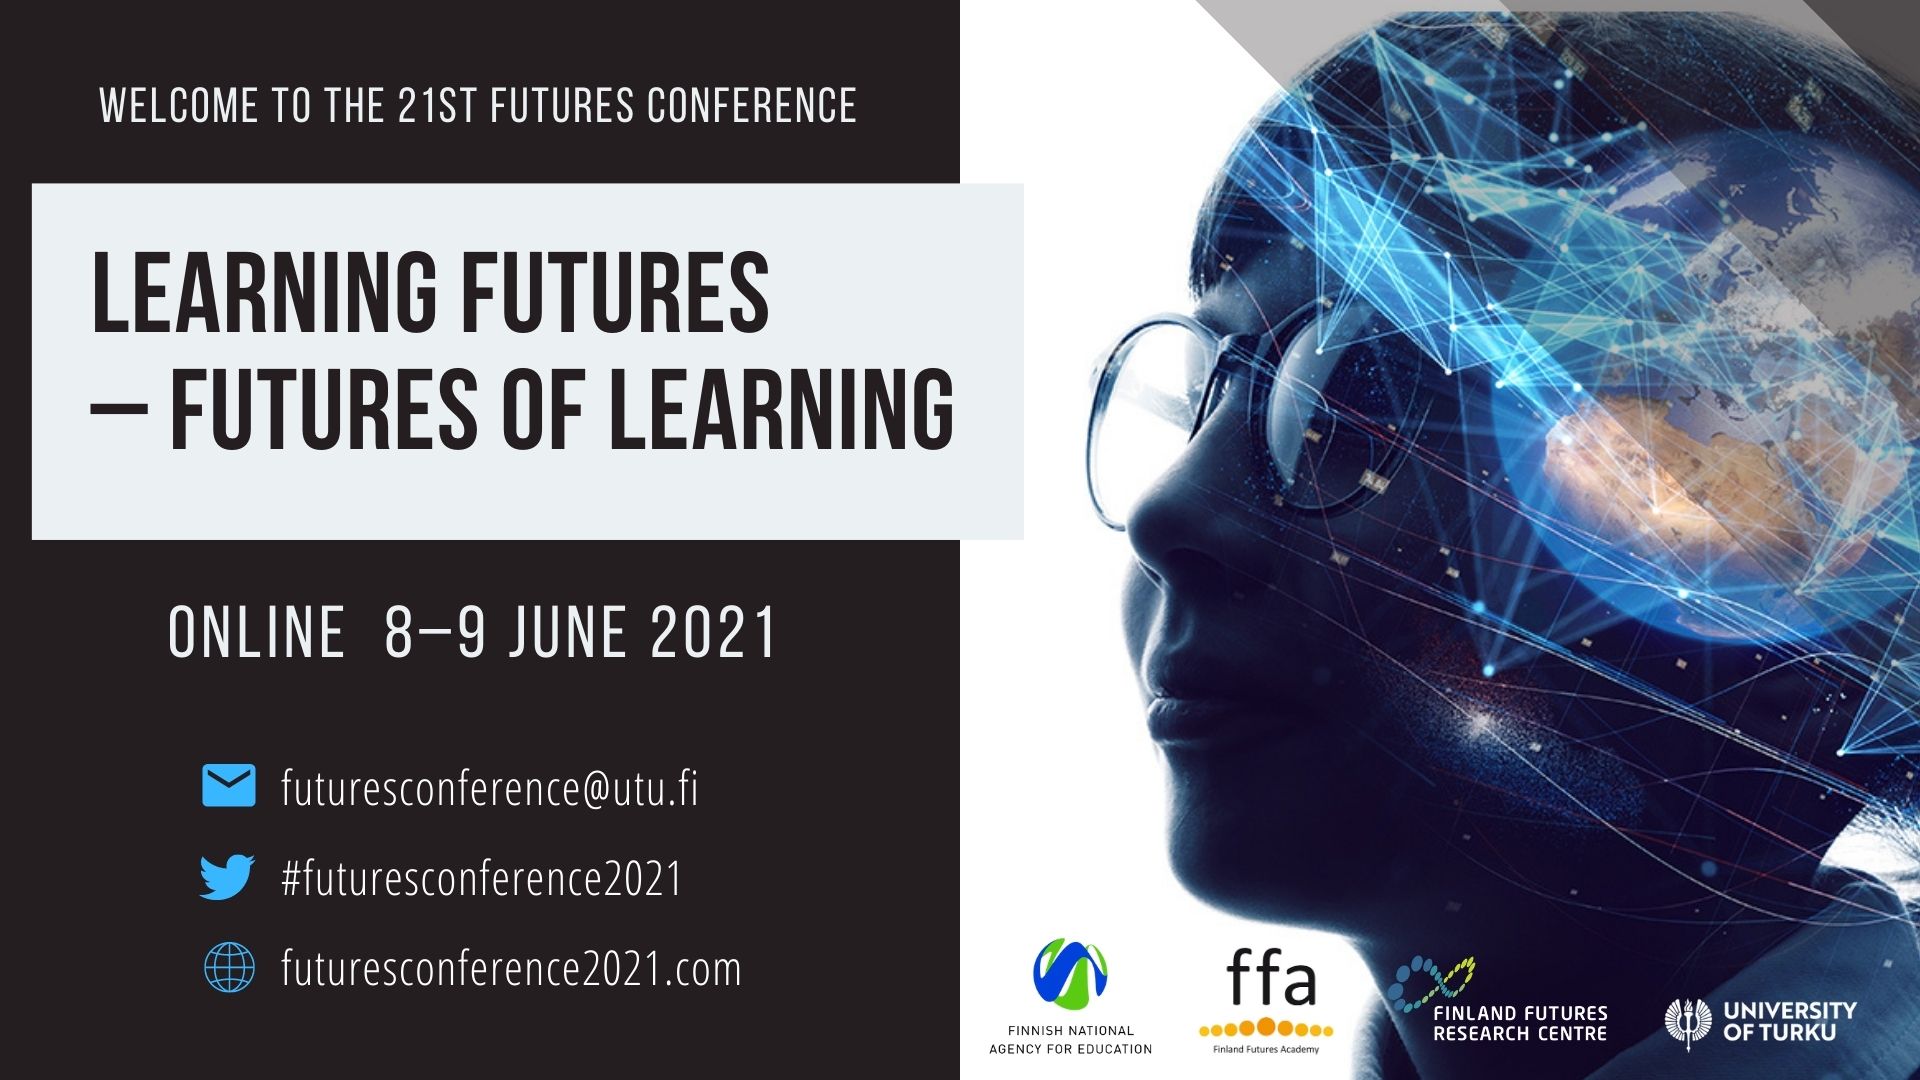 Welcome to the 21st Futures conference, online 8-9 June 2021